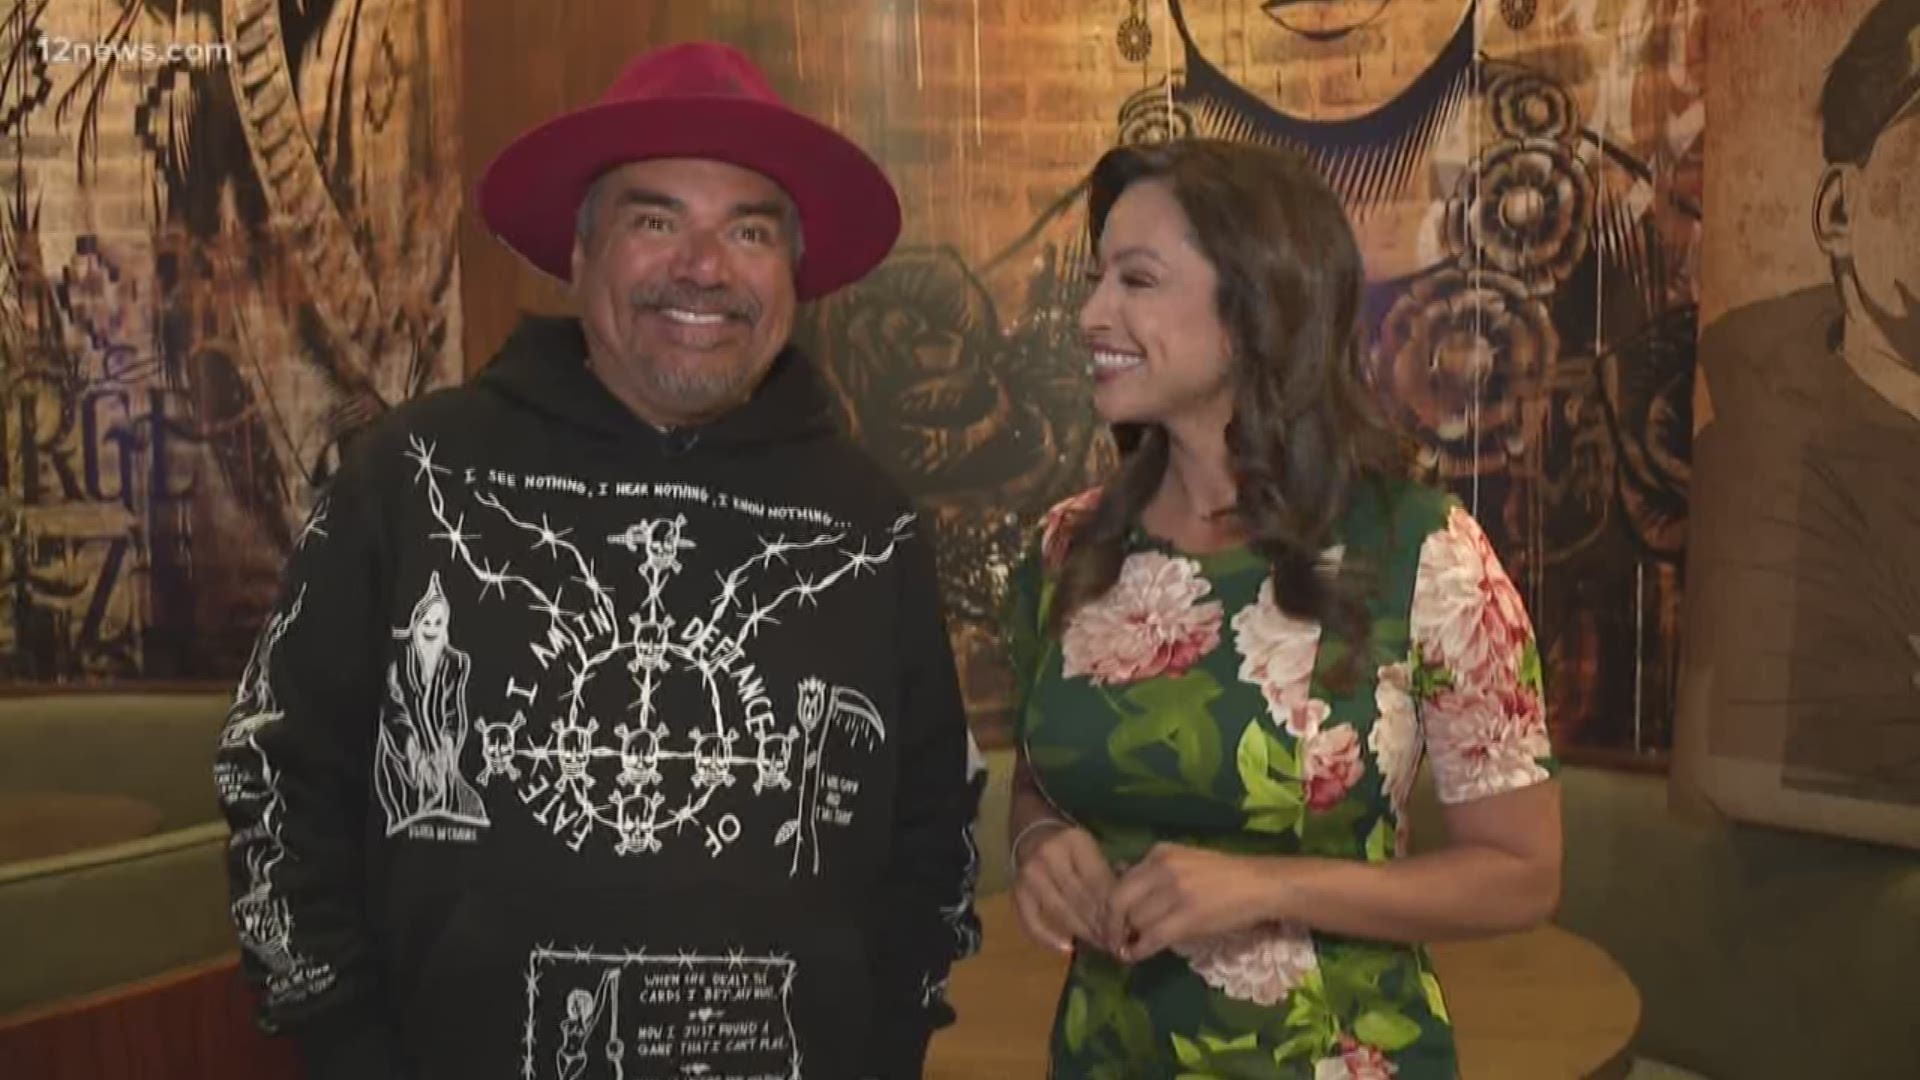 Vanessa Ramirez chats with comedian George Lopez about the opening of his new restaurant, "Chingon Kitchen" at Vee Quiva Hotel & Casino in Phoenix.